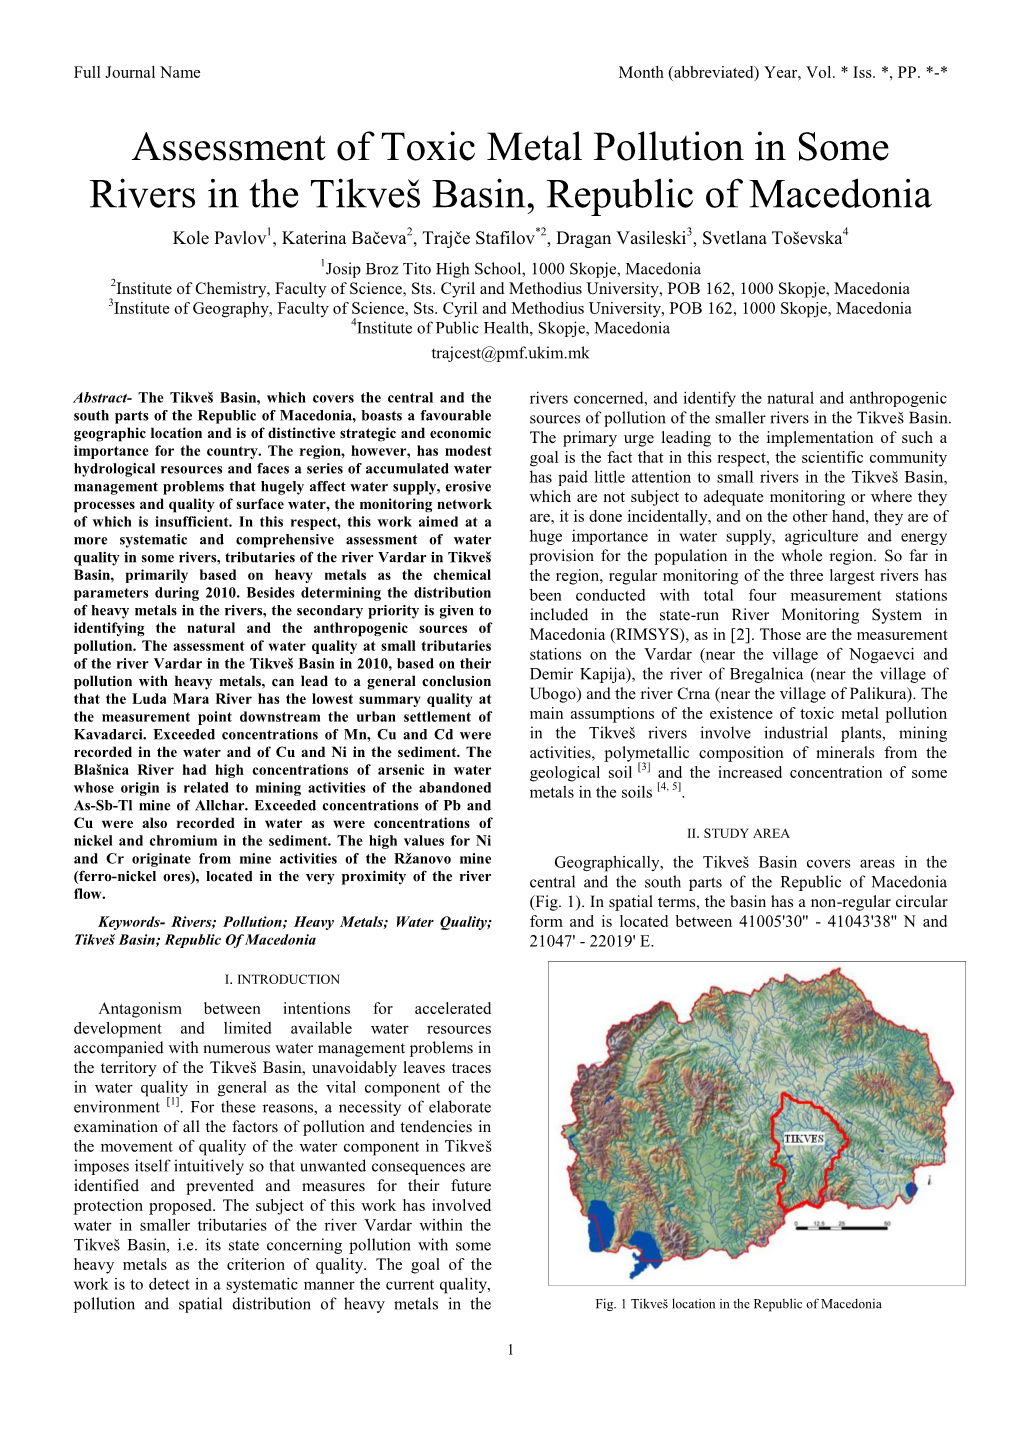 Assessment of Toxic Metal Pollution in Some Rivers in the Tikveš Basin